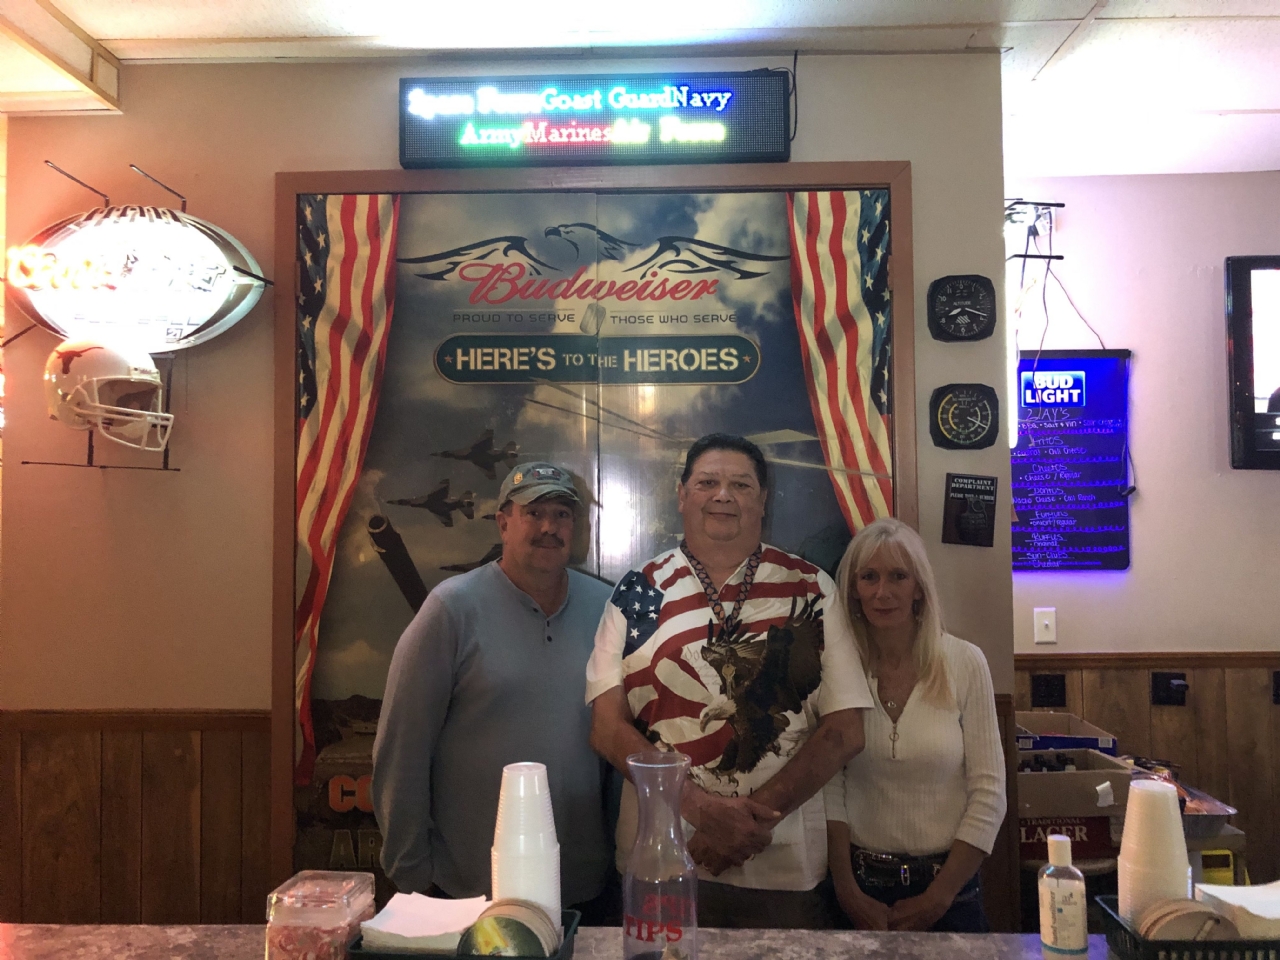 Canteen Manager William P. Banks Sr. on the left
Daytime bartender Cos Cullar in the middle
Michele McLaughlin bartender on the right